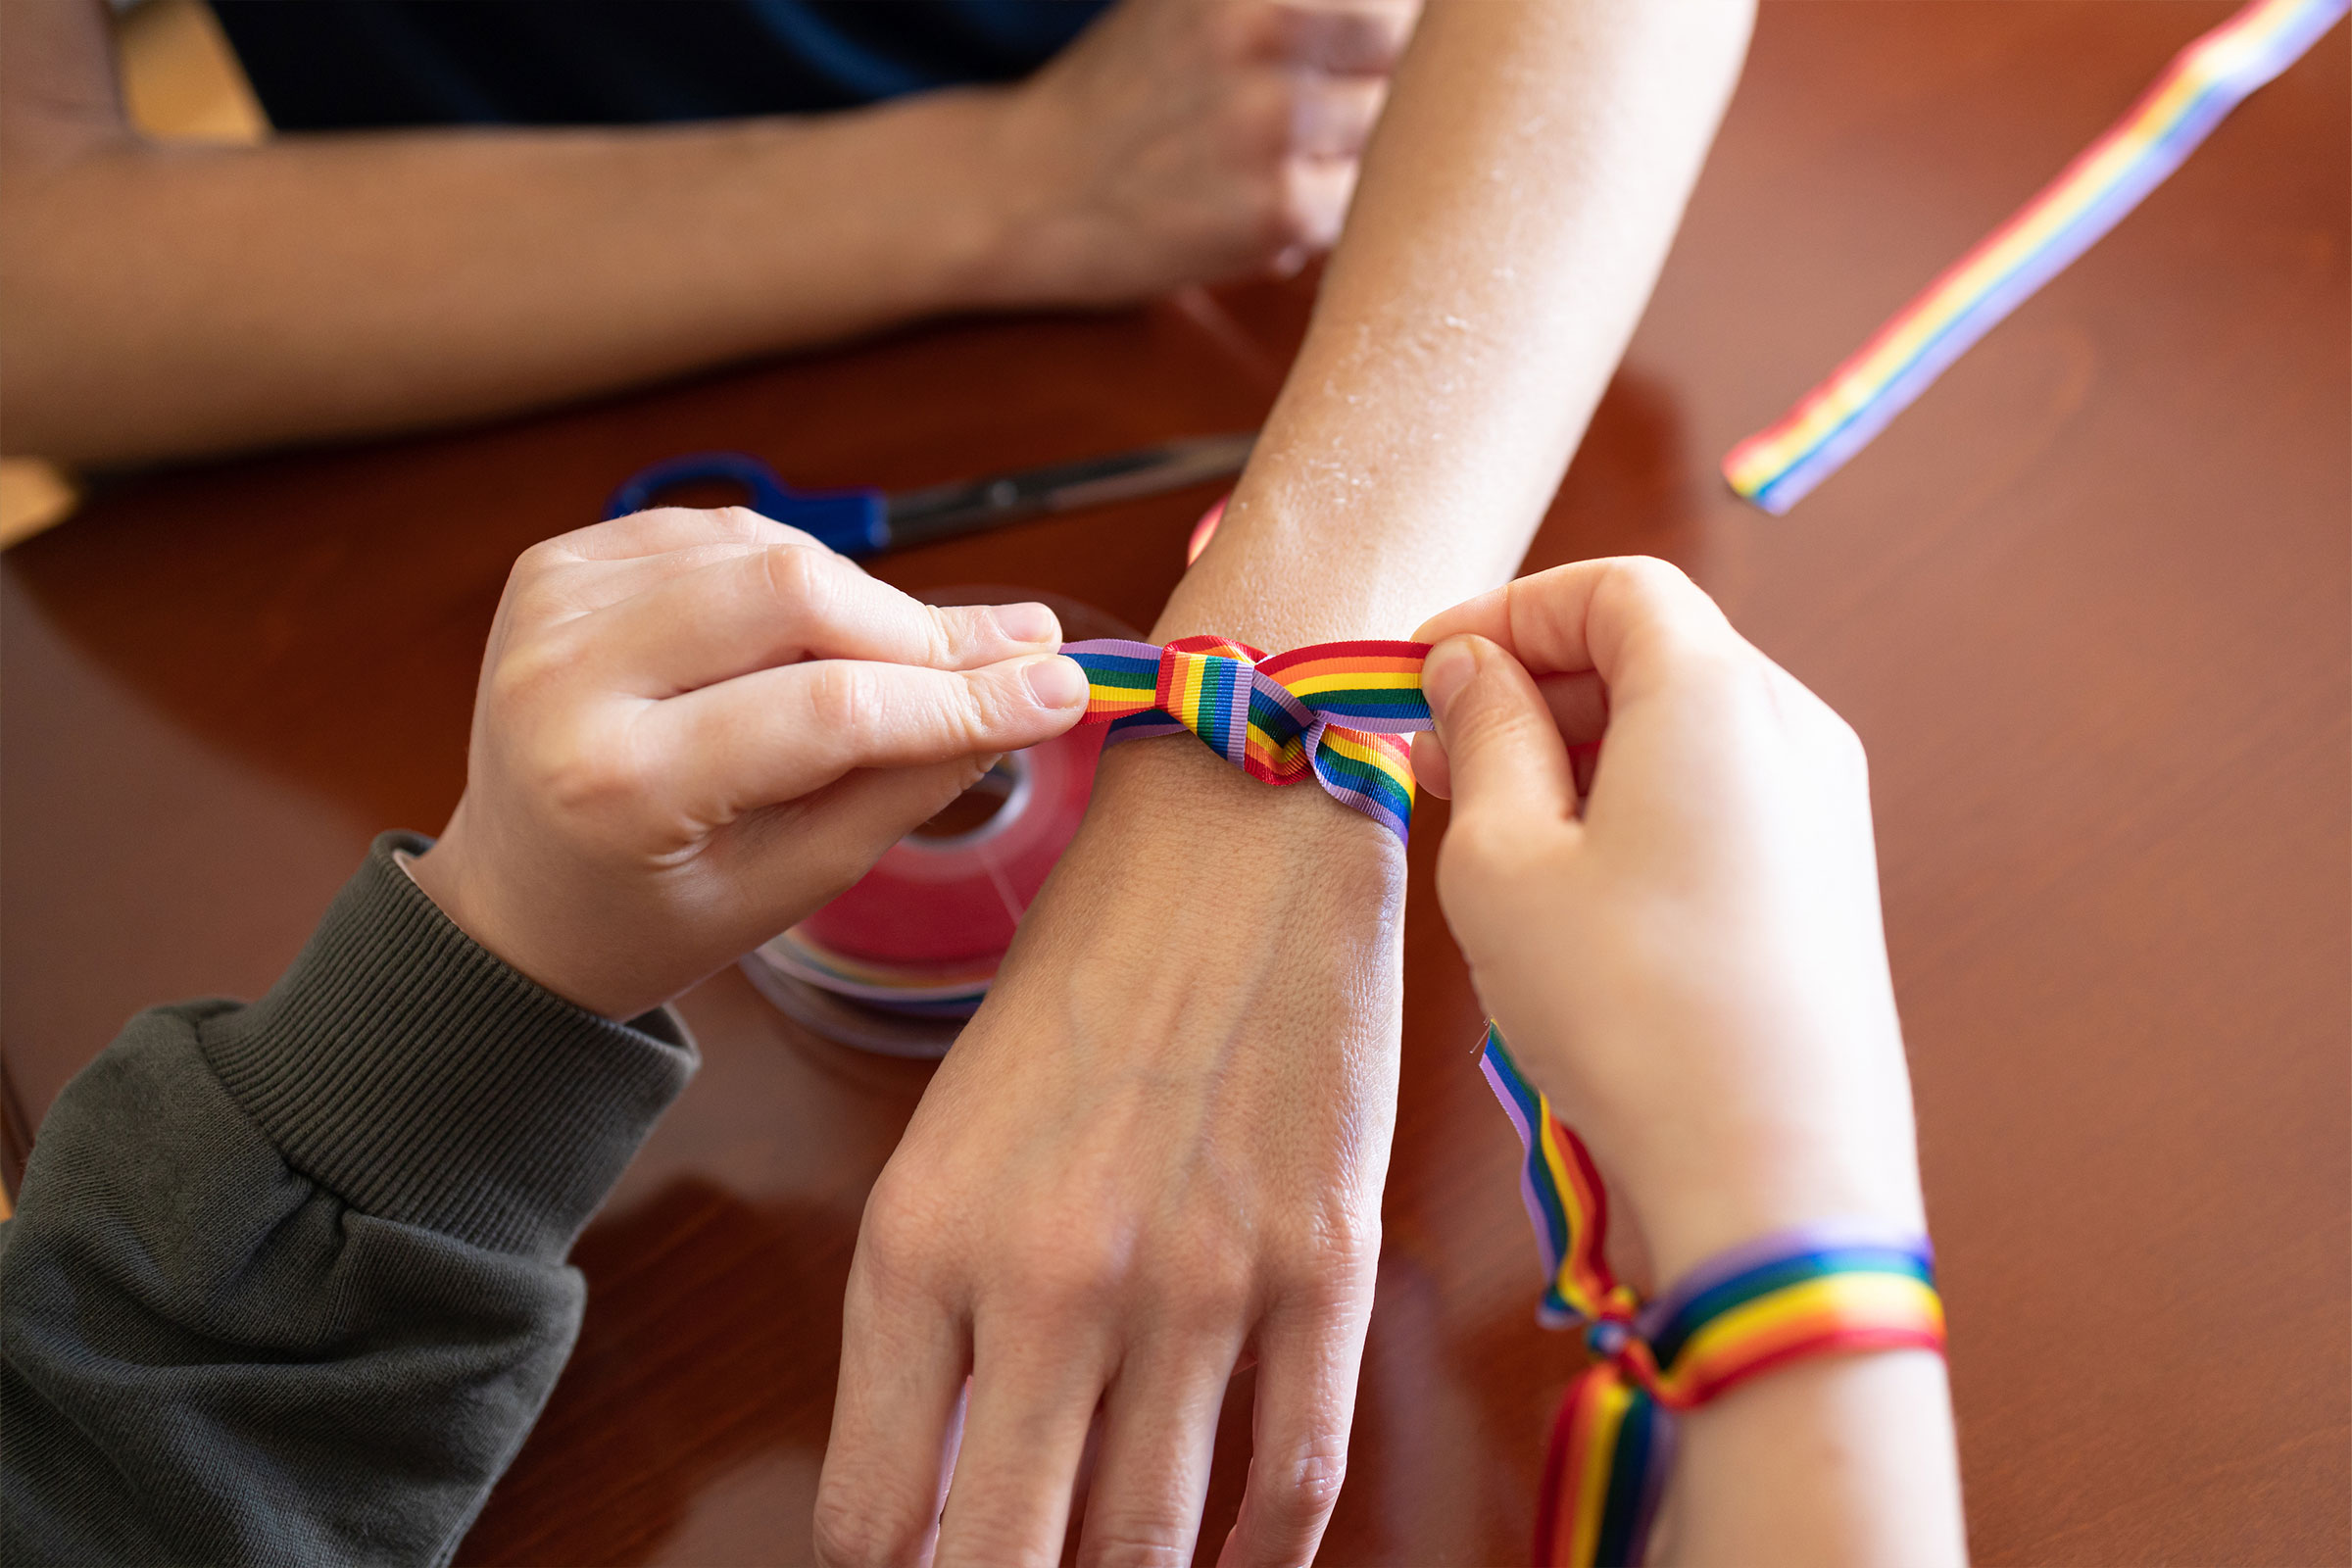 A pair of hands ties a rainbow ribbon on the wrist of another arm